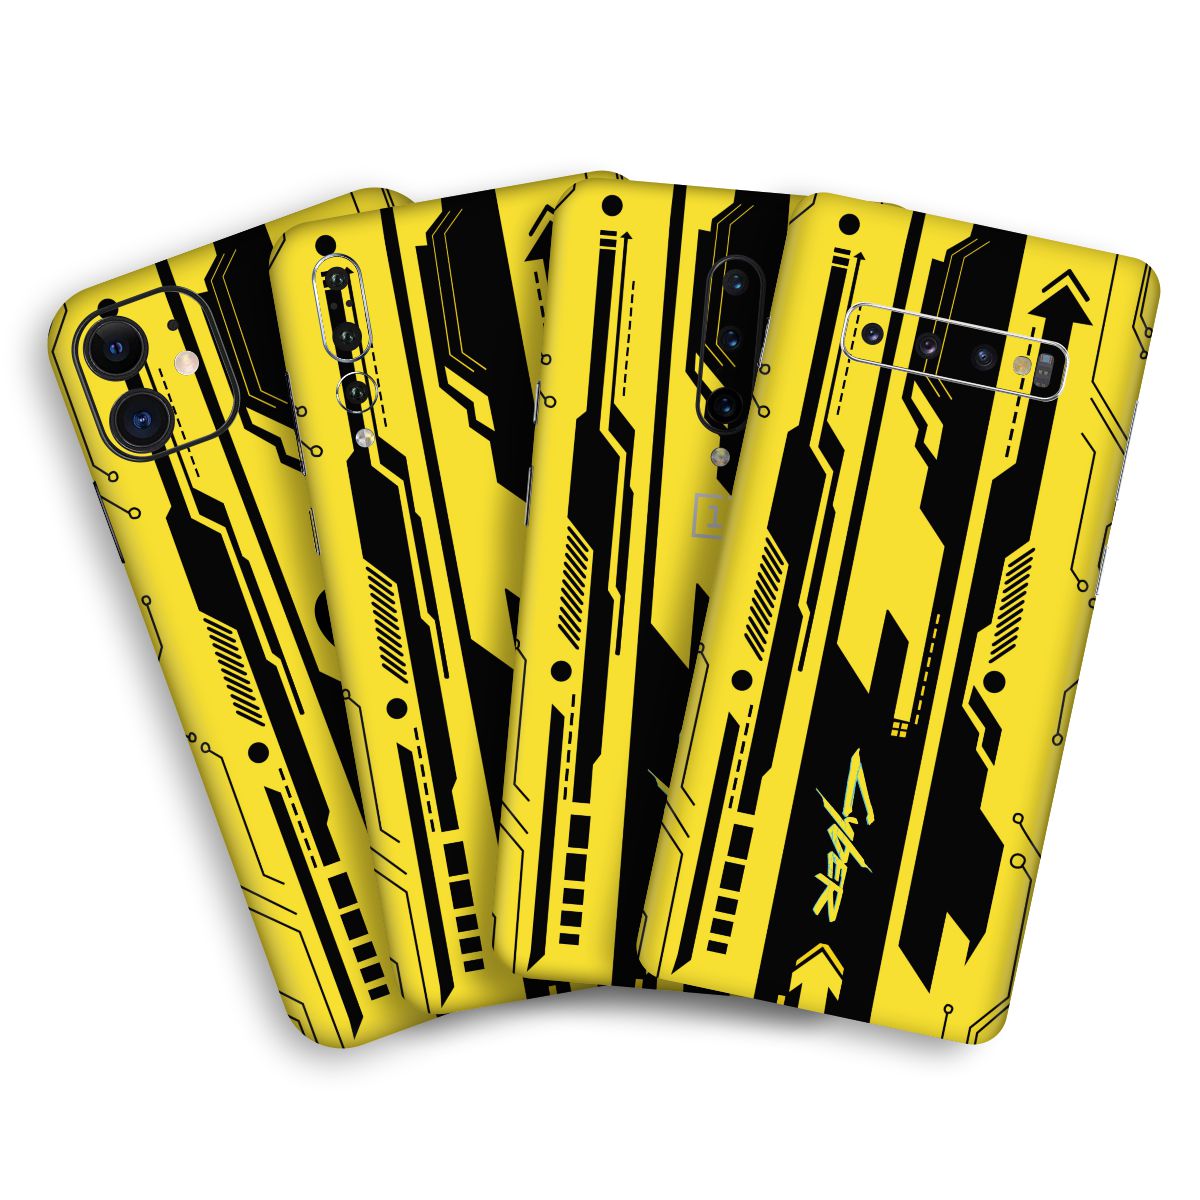 Cyber Yellow Mobile Skin / Mobile Wrap for Lg V40 Thinq